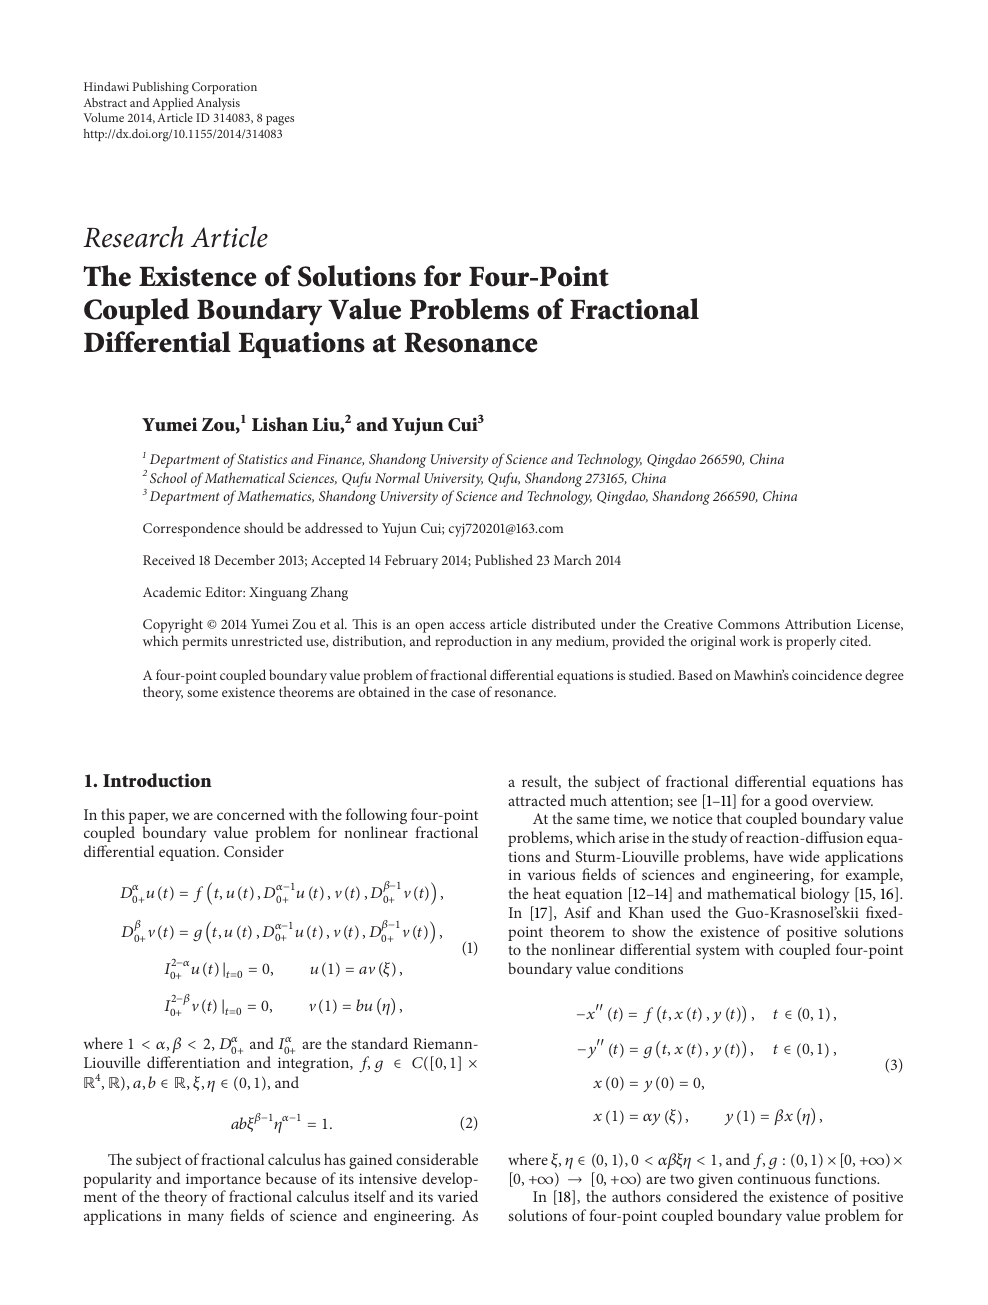 The Existence Of Solutions For Four Point Coupled Boundary Value Problems Of Fractional Differential Equations At Resonance Topic Of Research Paper In Mathematics Download Scholarly Article Pdf And Read For Free On